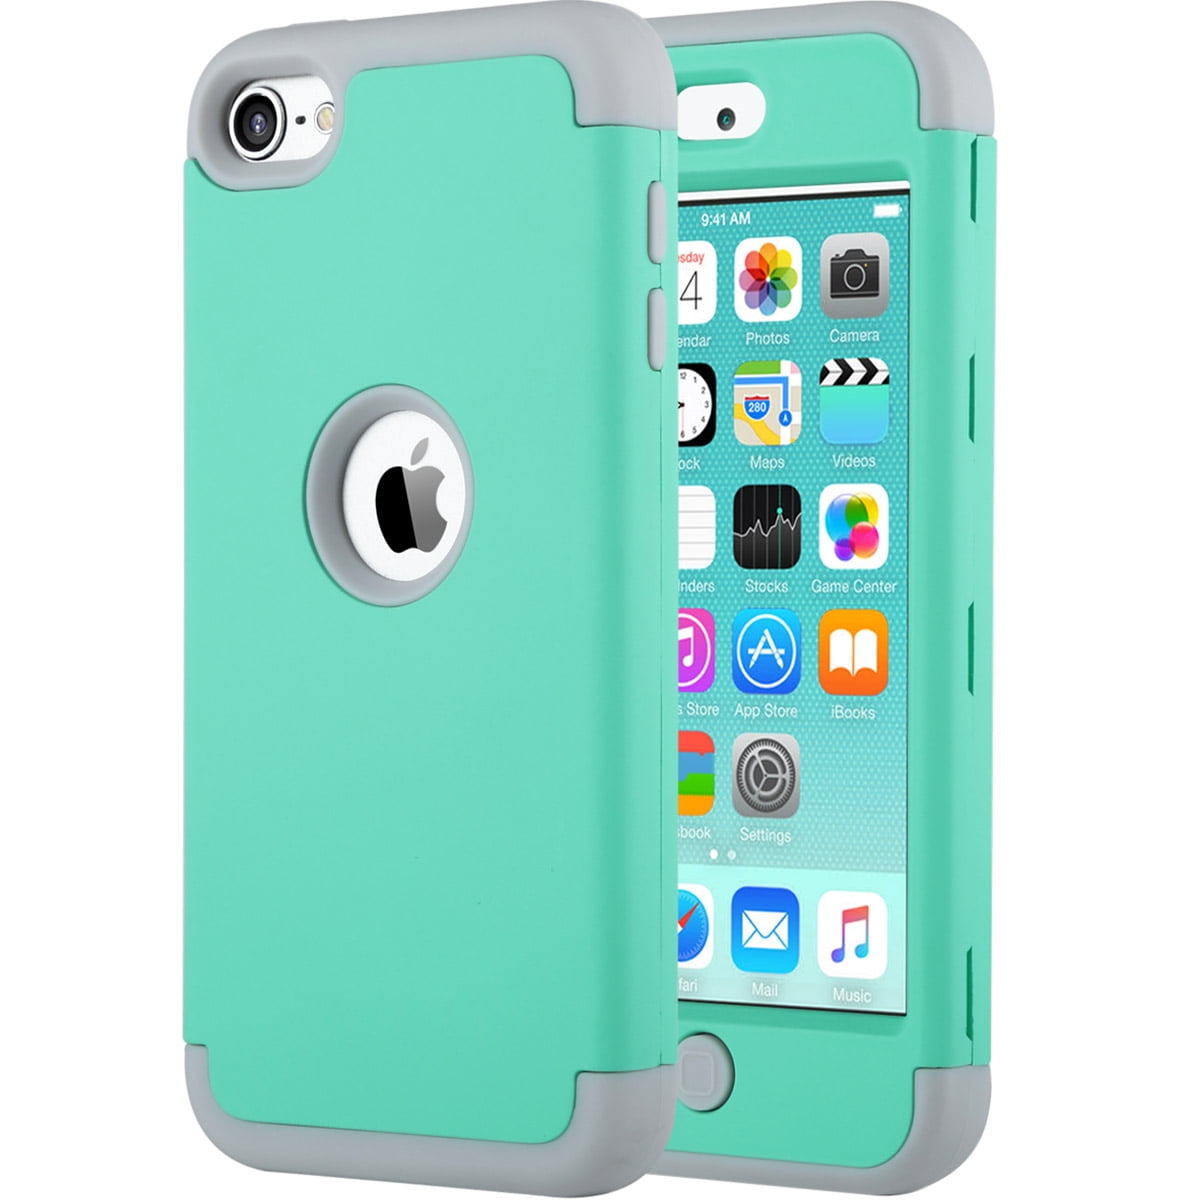 ULAK iPod Case for 7th 6th 5th generation, iPod Touch 7 6 5 Case Heavy Duty Armor Cover for Apple iPod Touch 5th/6th/7th Gen, Green - Walmart.com